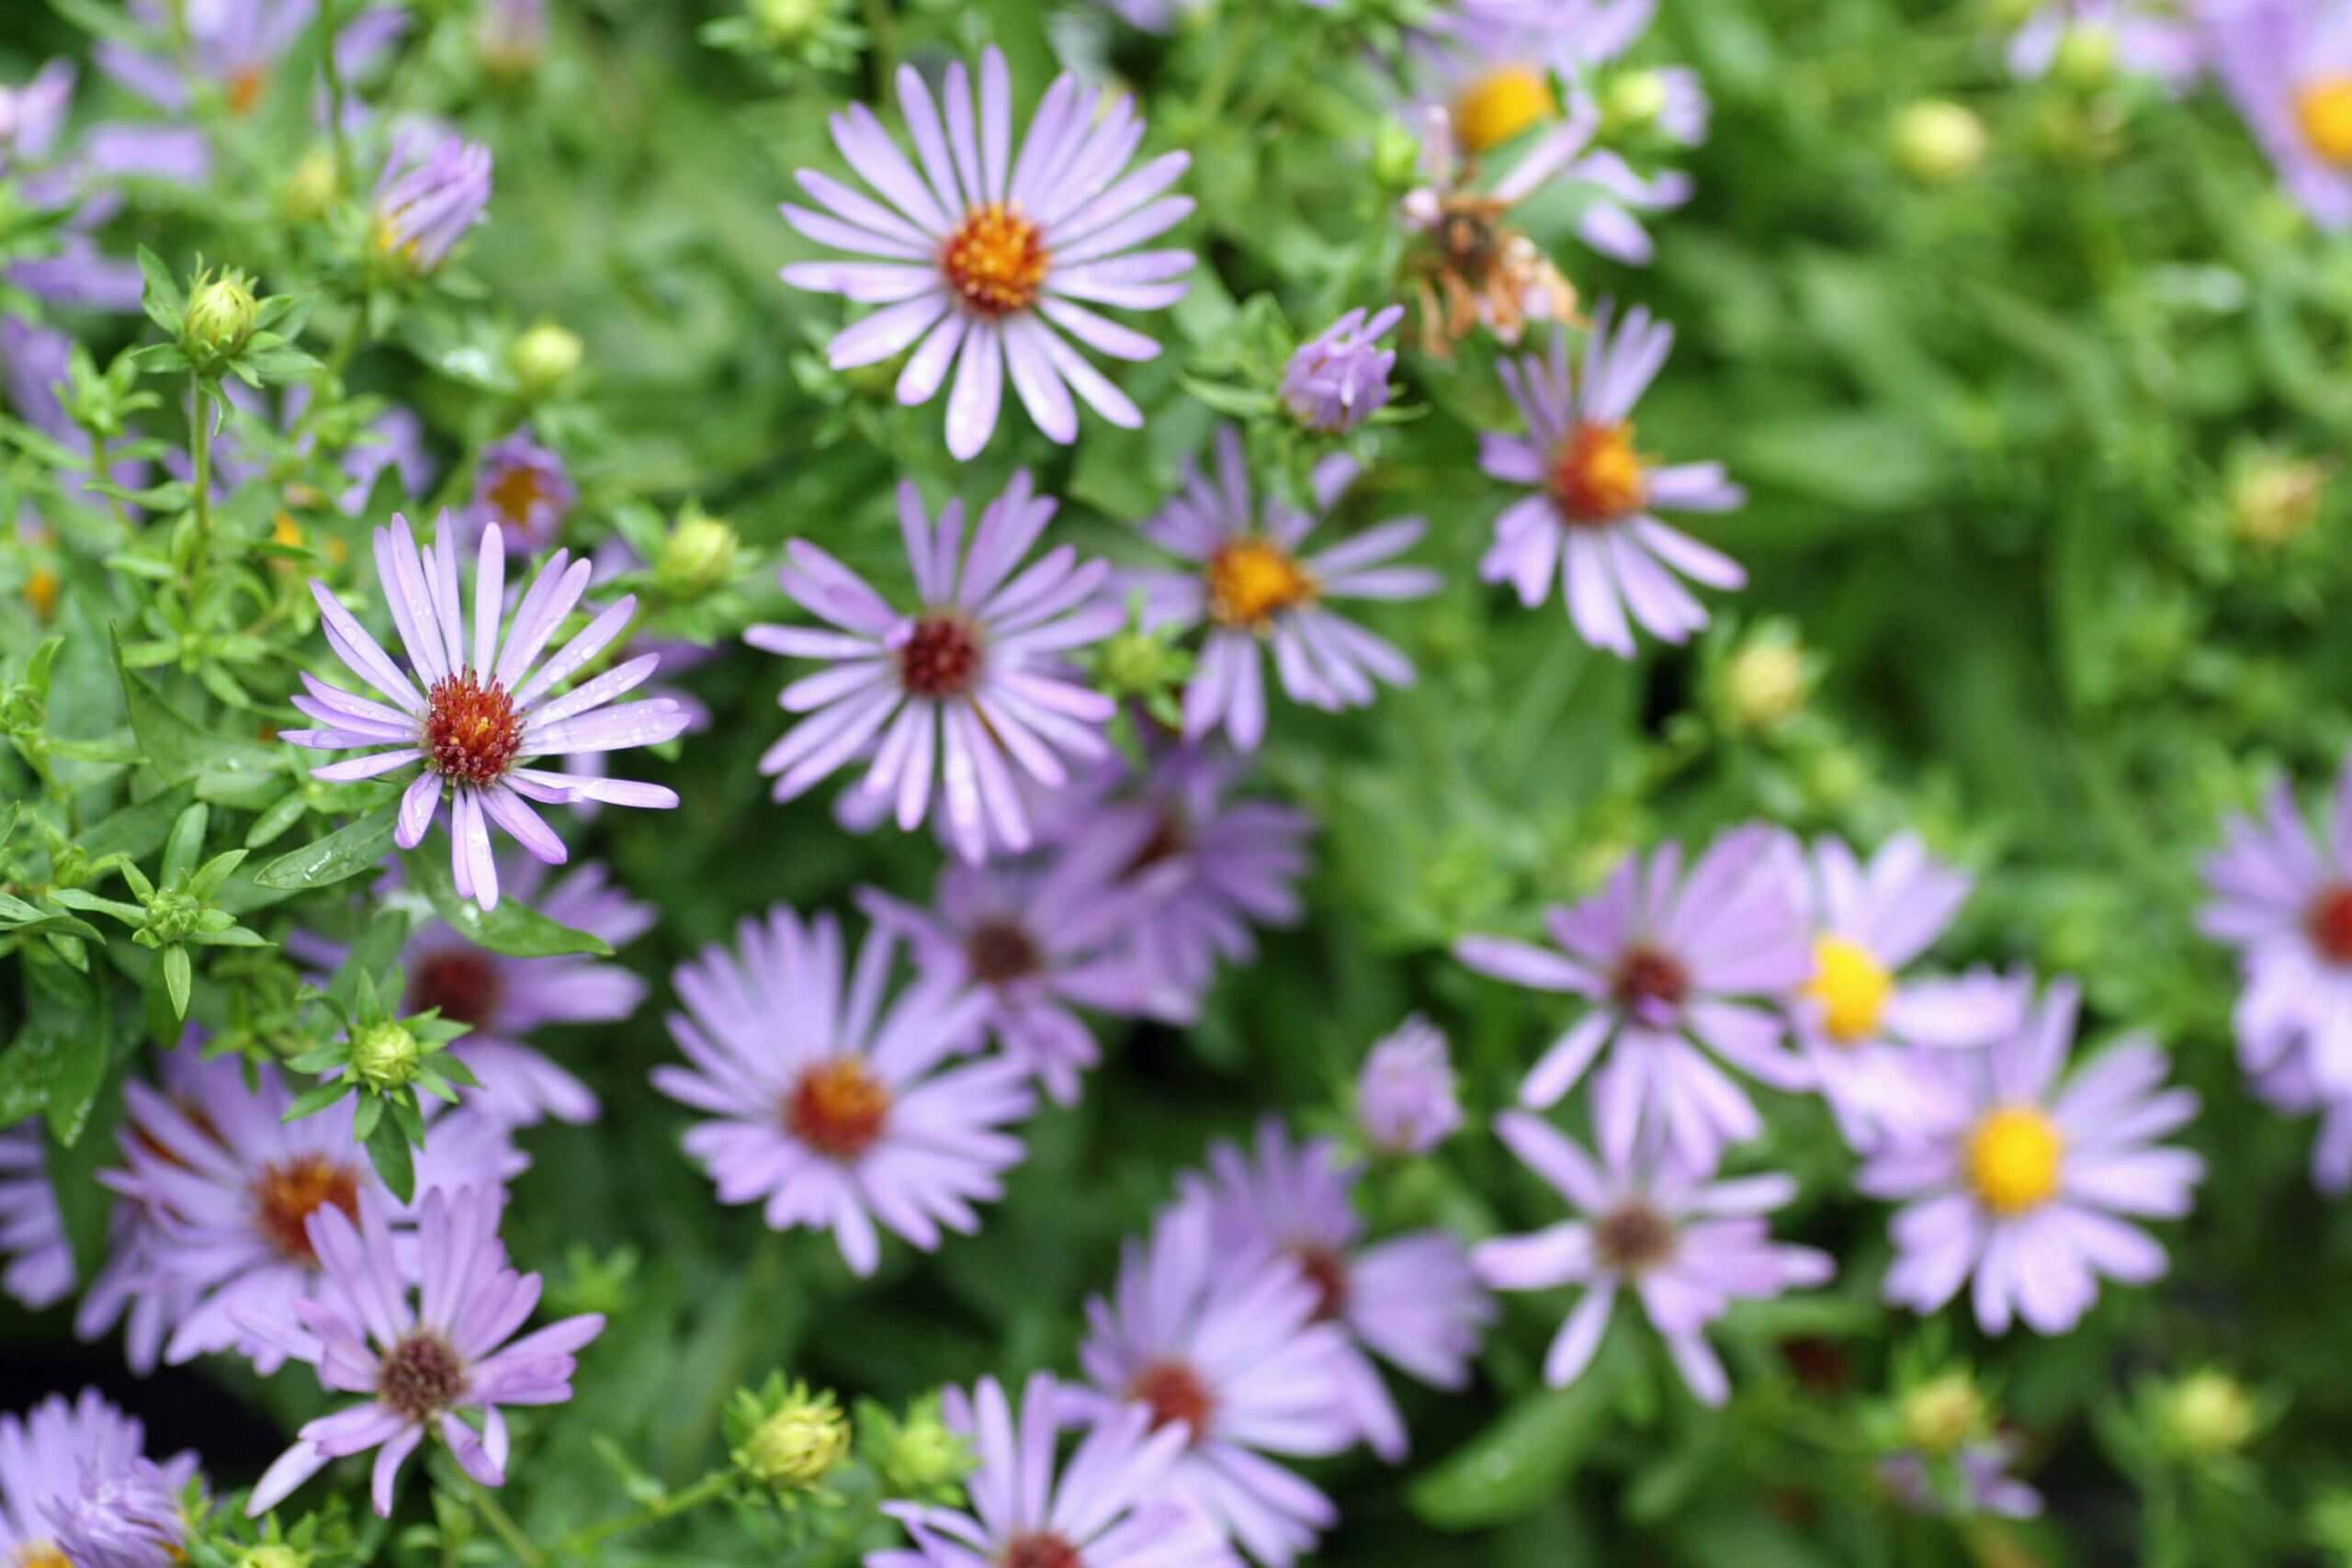 The pale violet blue flowers of Aster oblongifolius 'October Skies' are loved by bees and butterflies.